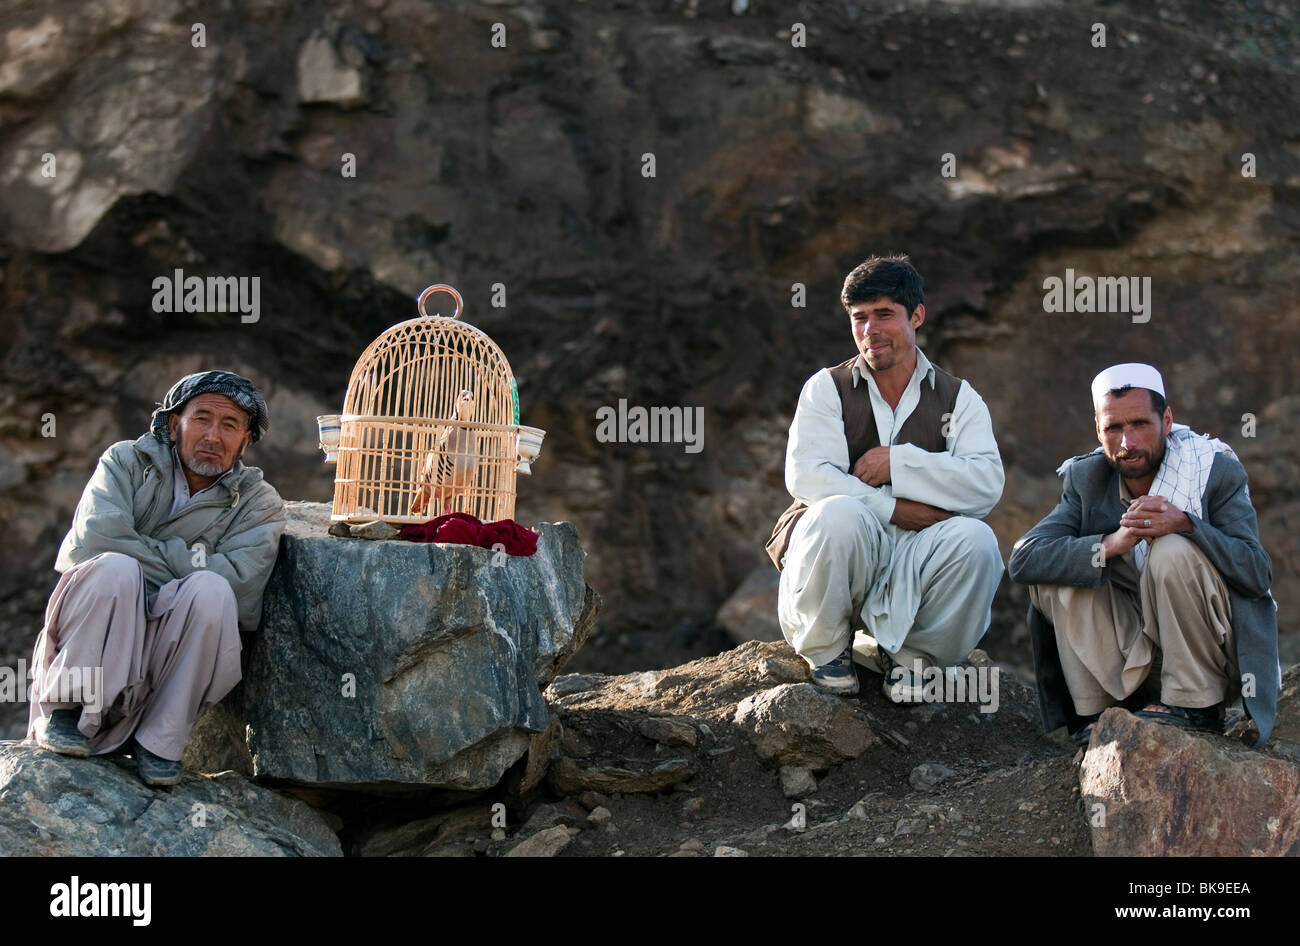 Afghans waiting with their fighting bird. Life in Kabul is full of interesting faces with experience etched into their faces. Stock Photo